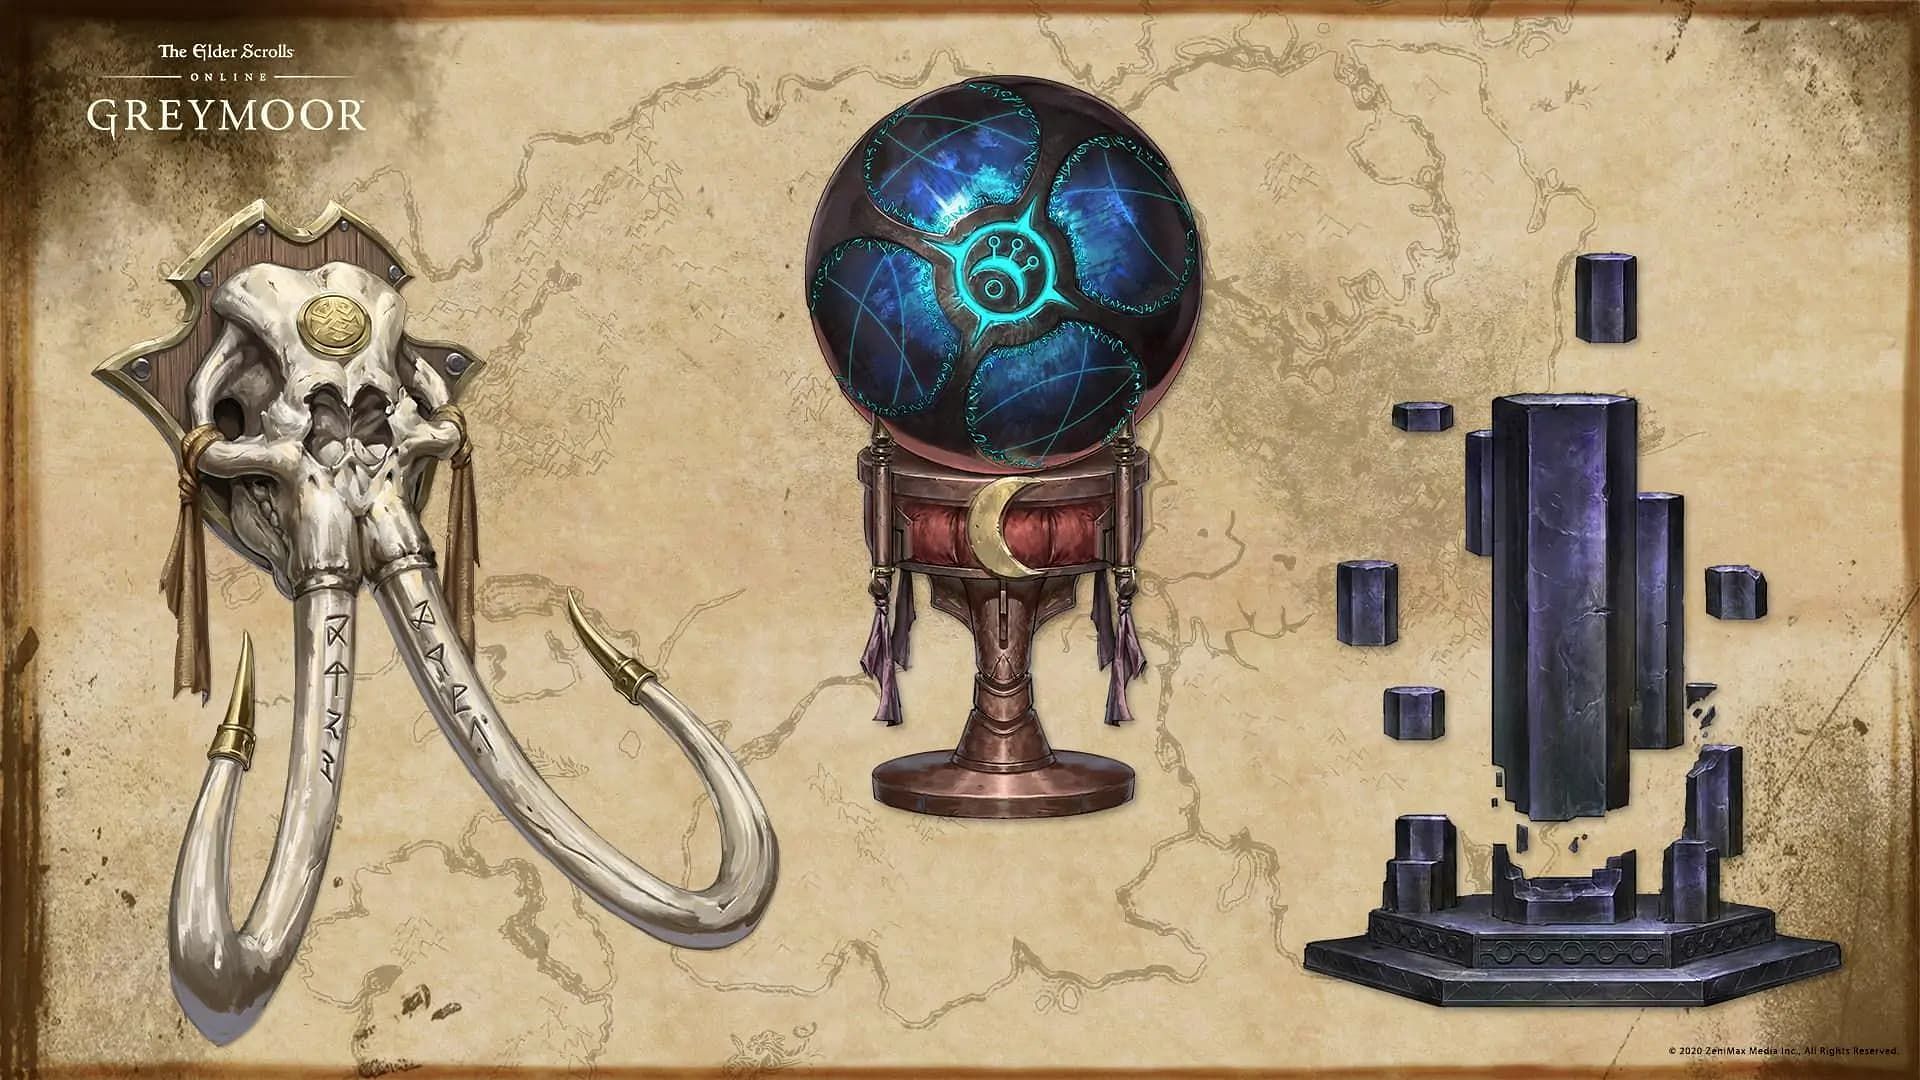 You can obtain the Amulet via the Antiquities system in ESO (Image via Zenimax Online Studios)